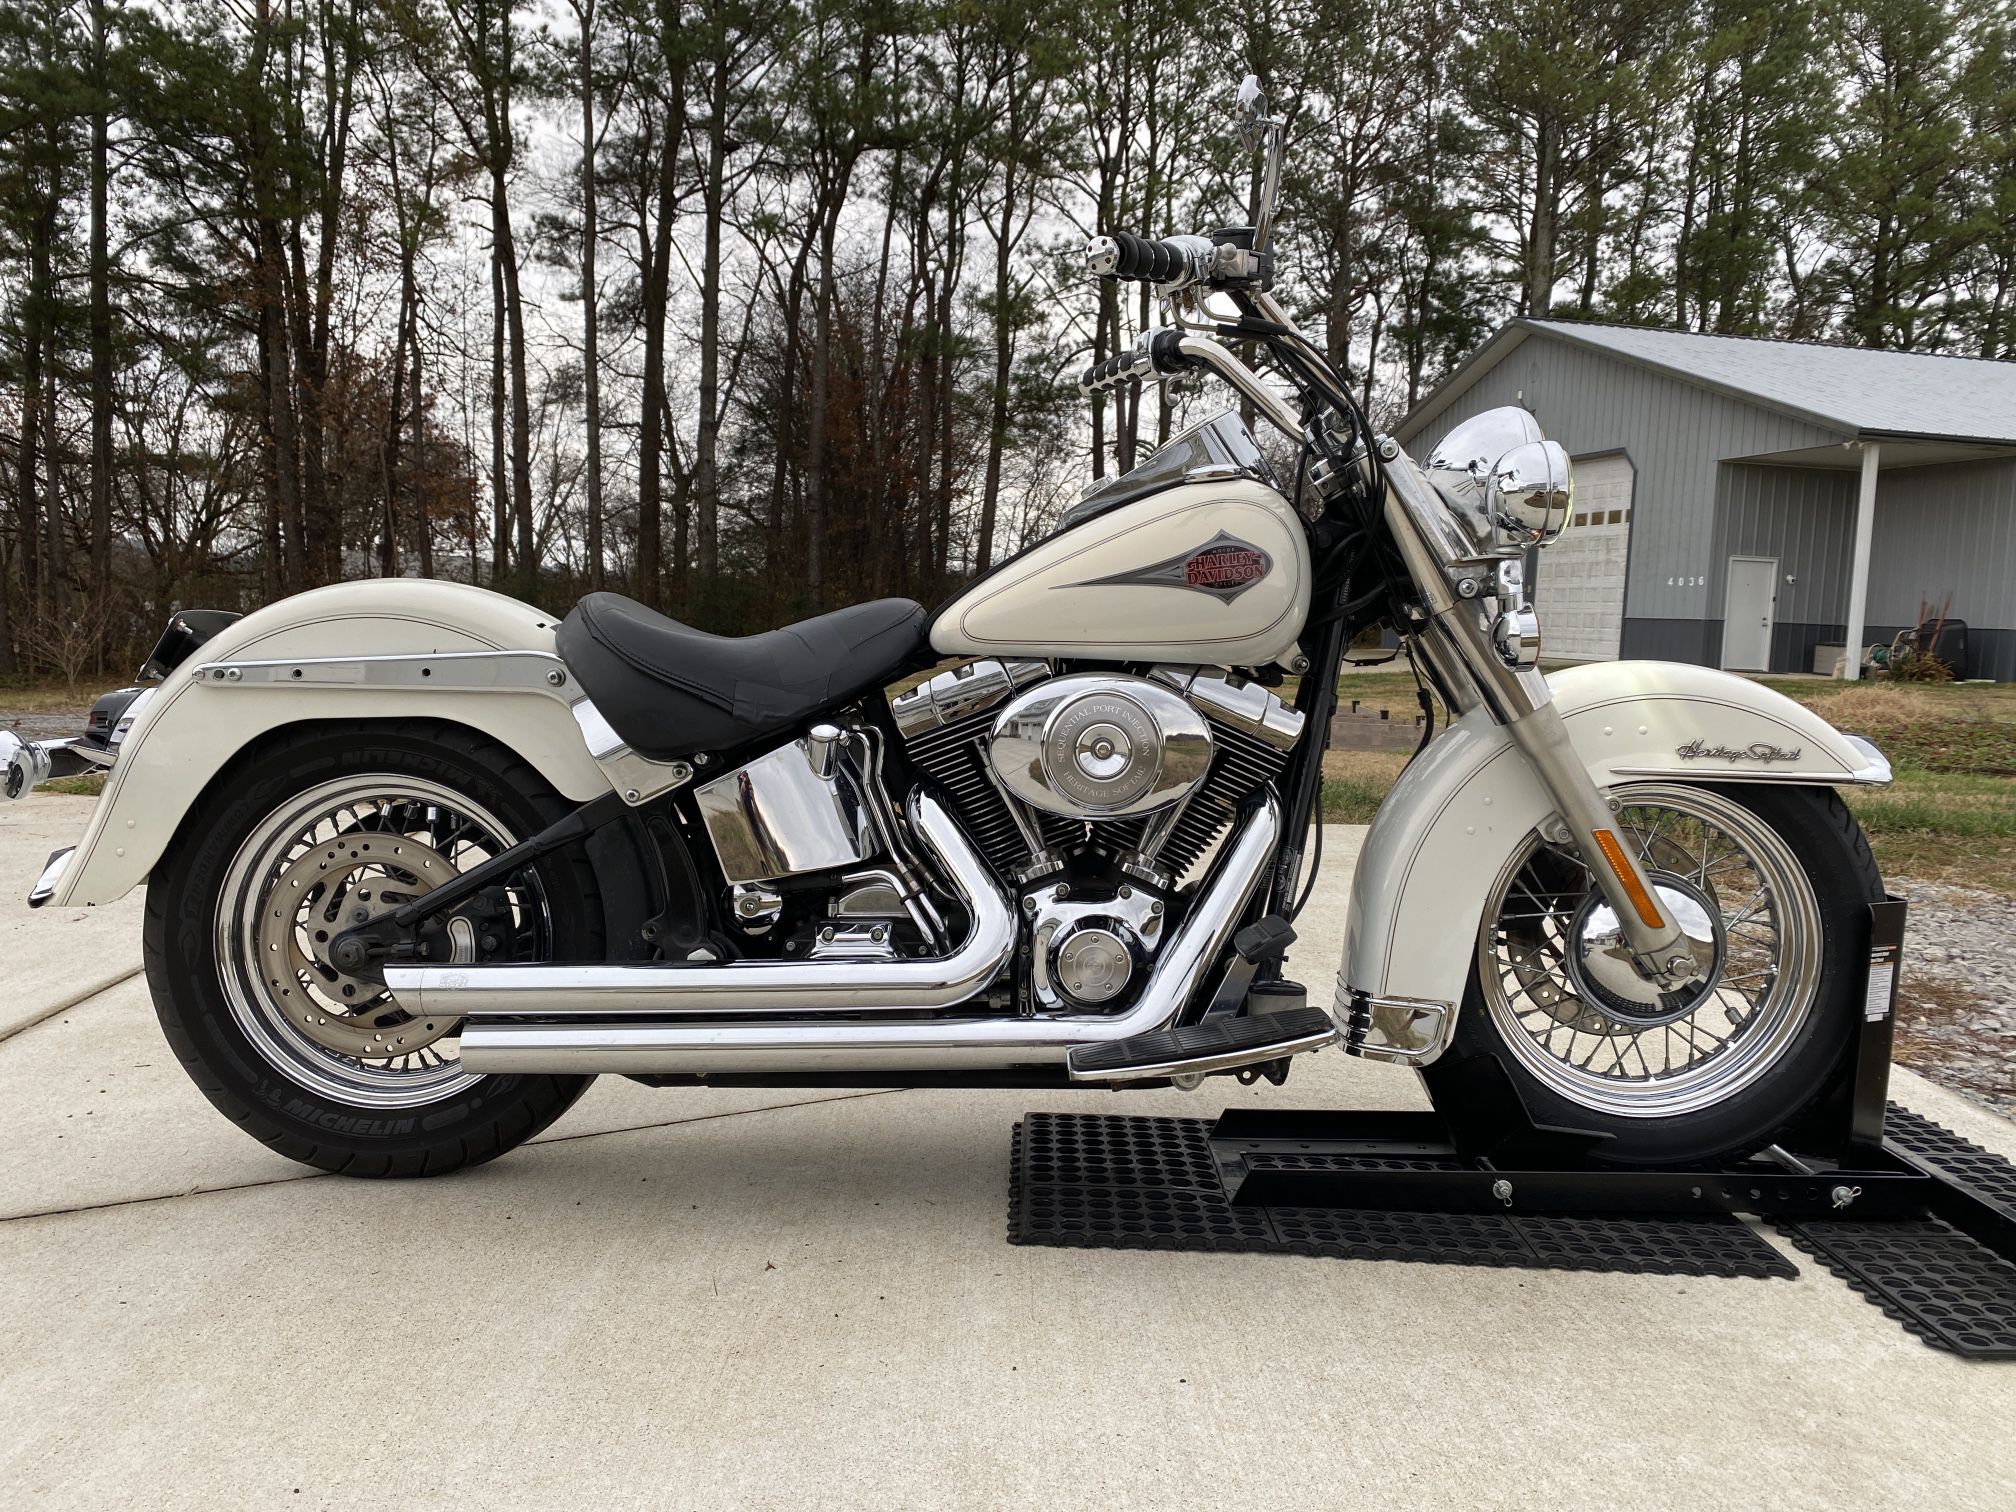 2001 Harley-Davidson Heritage Softail Classic Fuel Injected